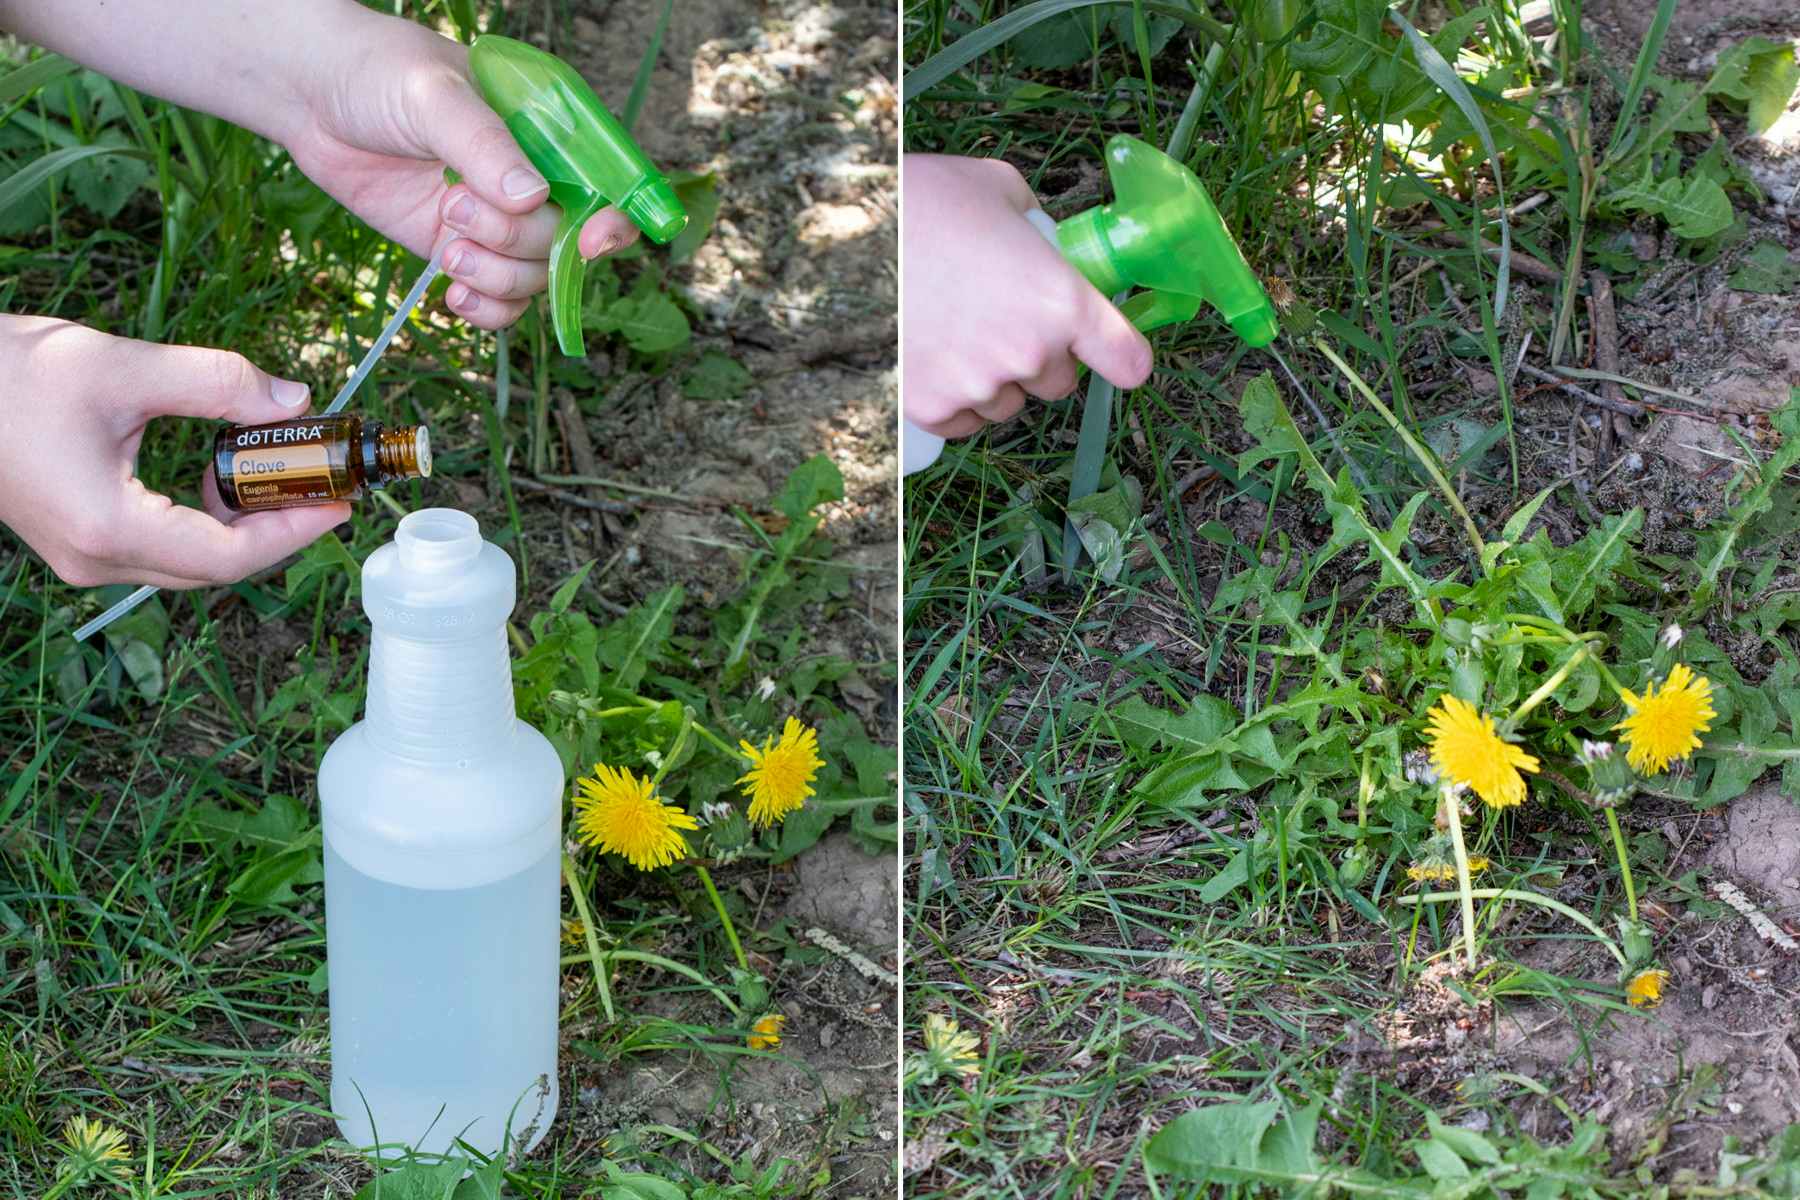 Add clove and peppermint oil to naturally kill weeds and keep away bugs.